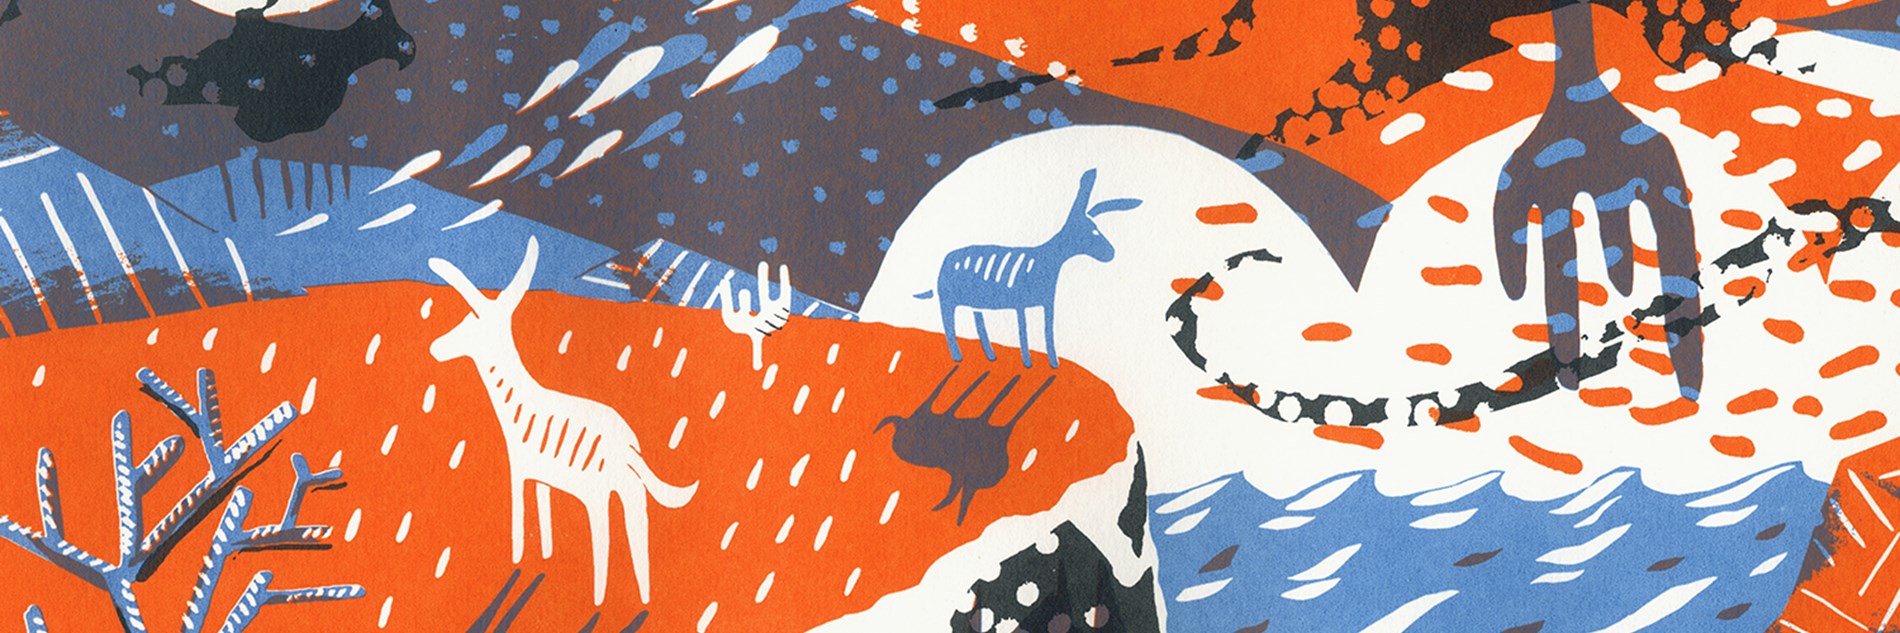 A colourful, abstract, screen print scene. The image features blues, greys and oranges. There are two donkeys stood on a cliff with the sea below, to the right. The sky is made up of swirls, raindrops and blocks of colour.